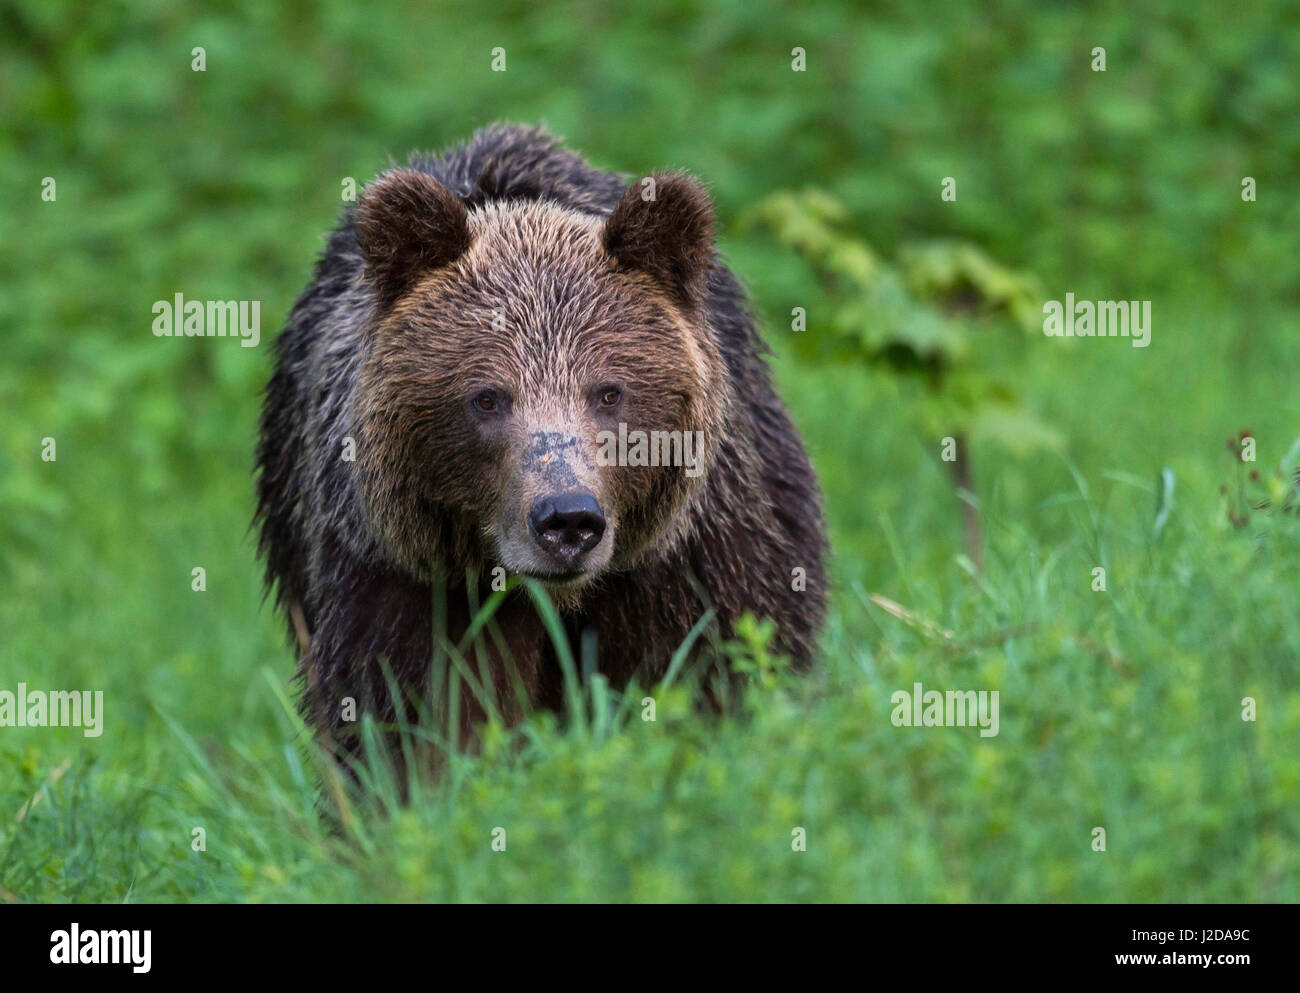 Adult female brown bear after rainfall Stock Photo